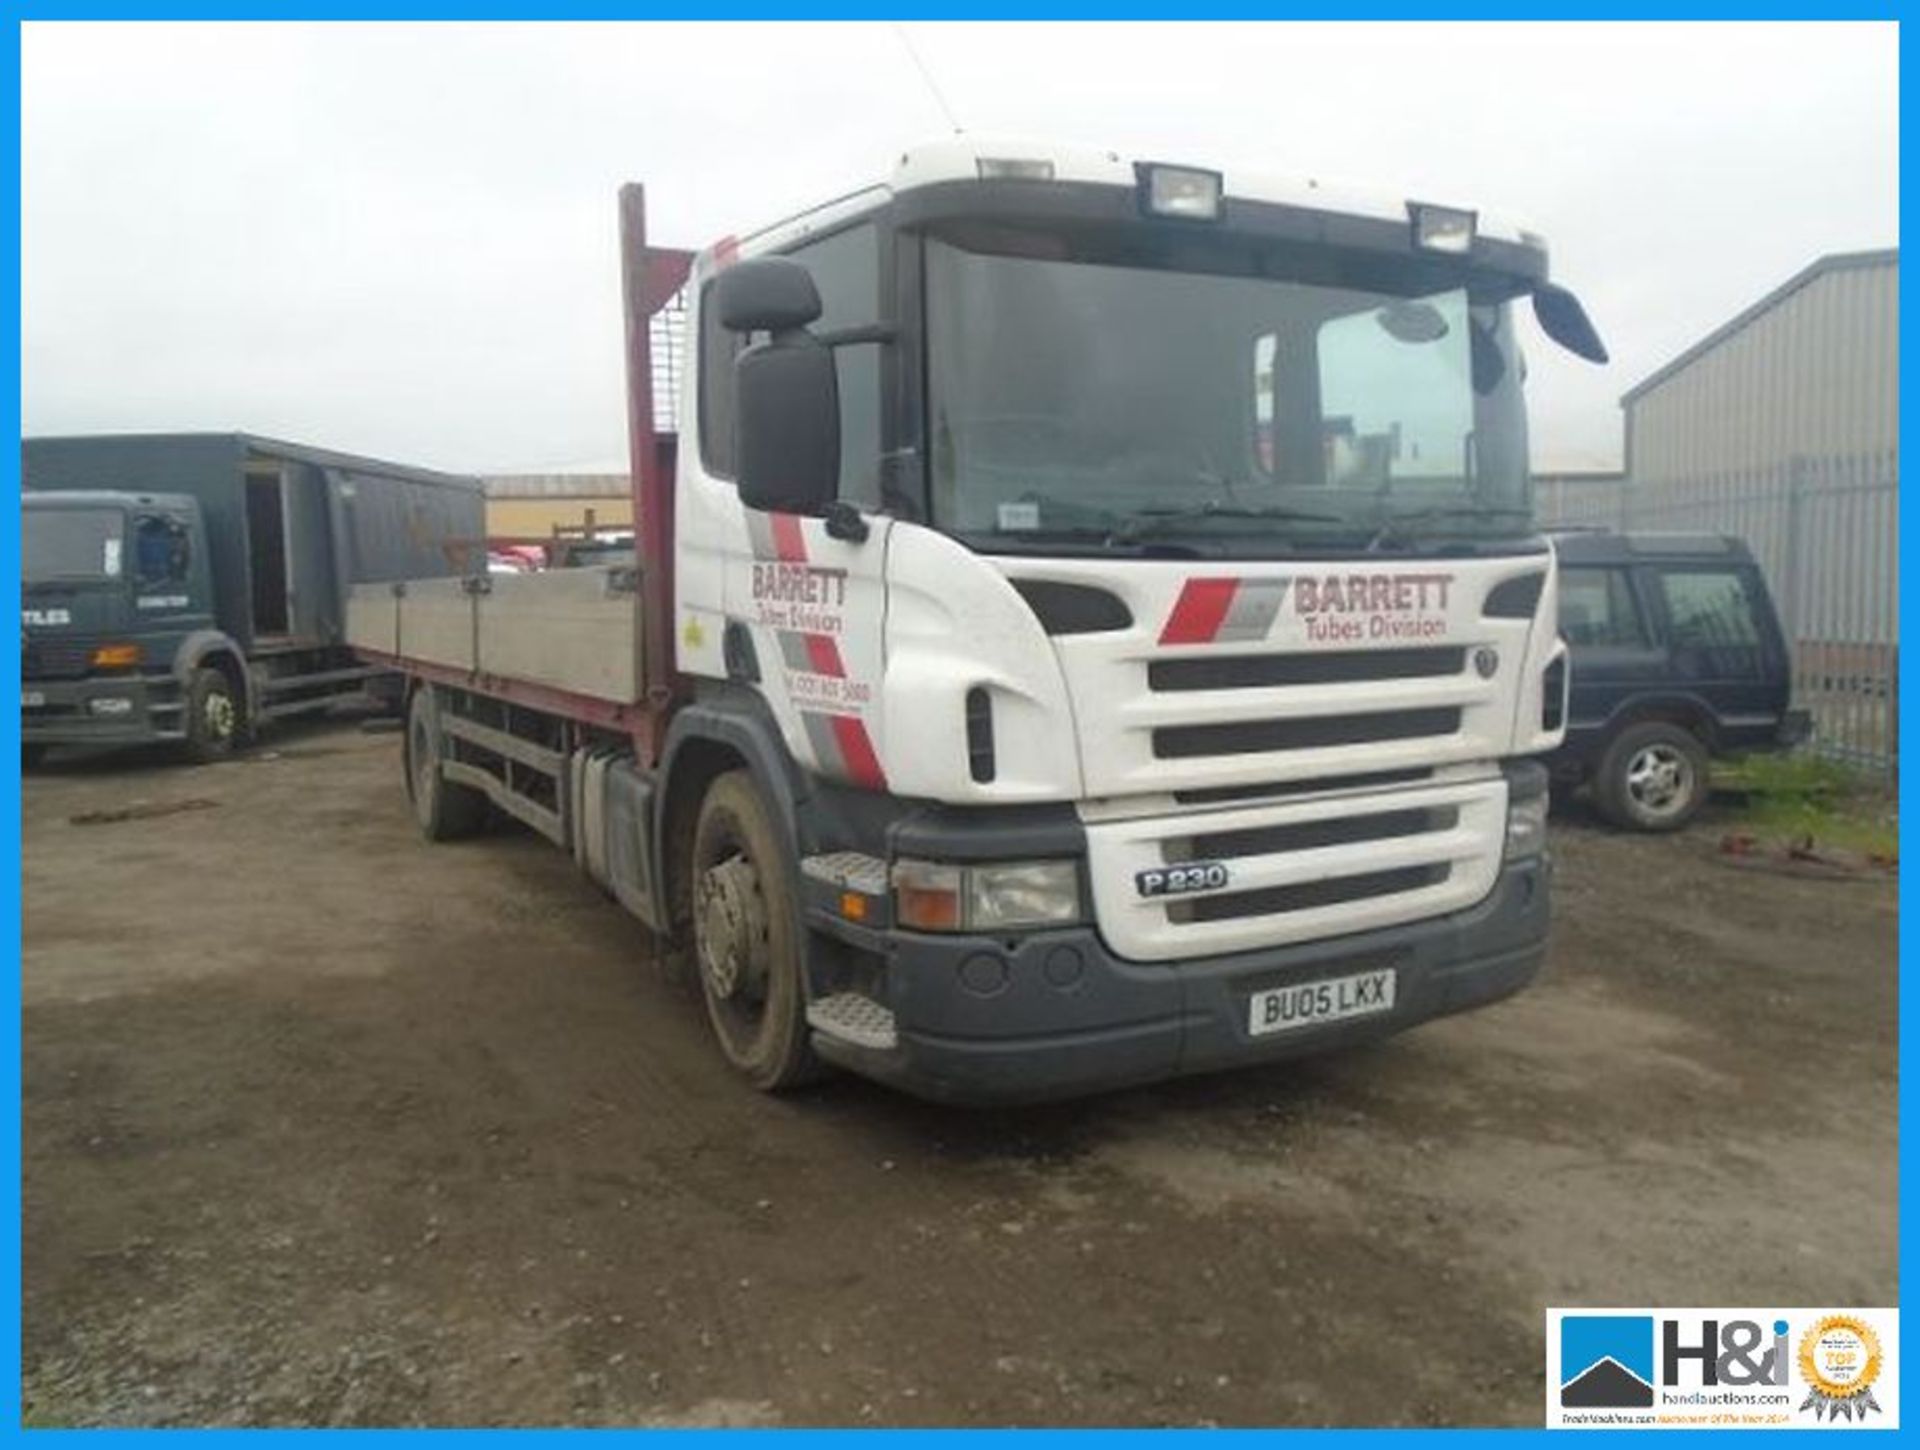 2005 SCANIA P230, 641973 KM, 27FT DROP SIDE BODY, MANUAL GEAR BOX, 4X2, DAY CAB, STEEL SUSPENSION,